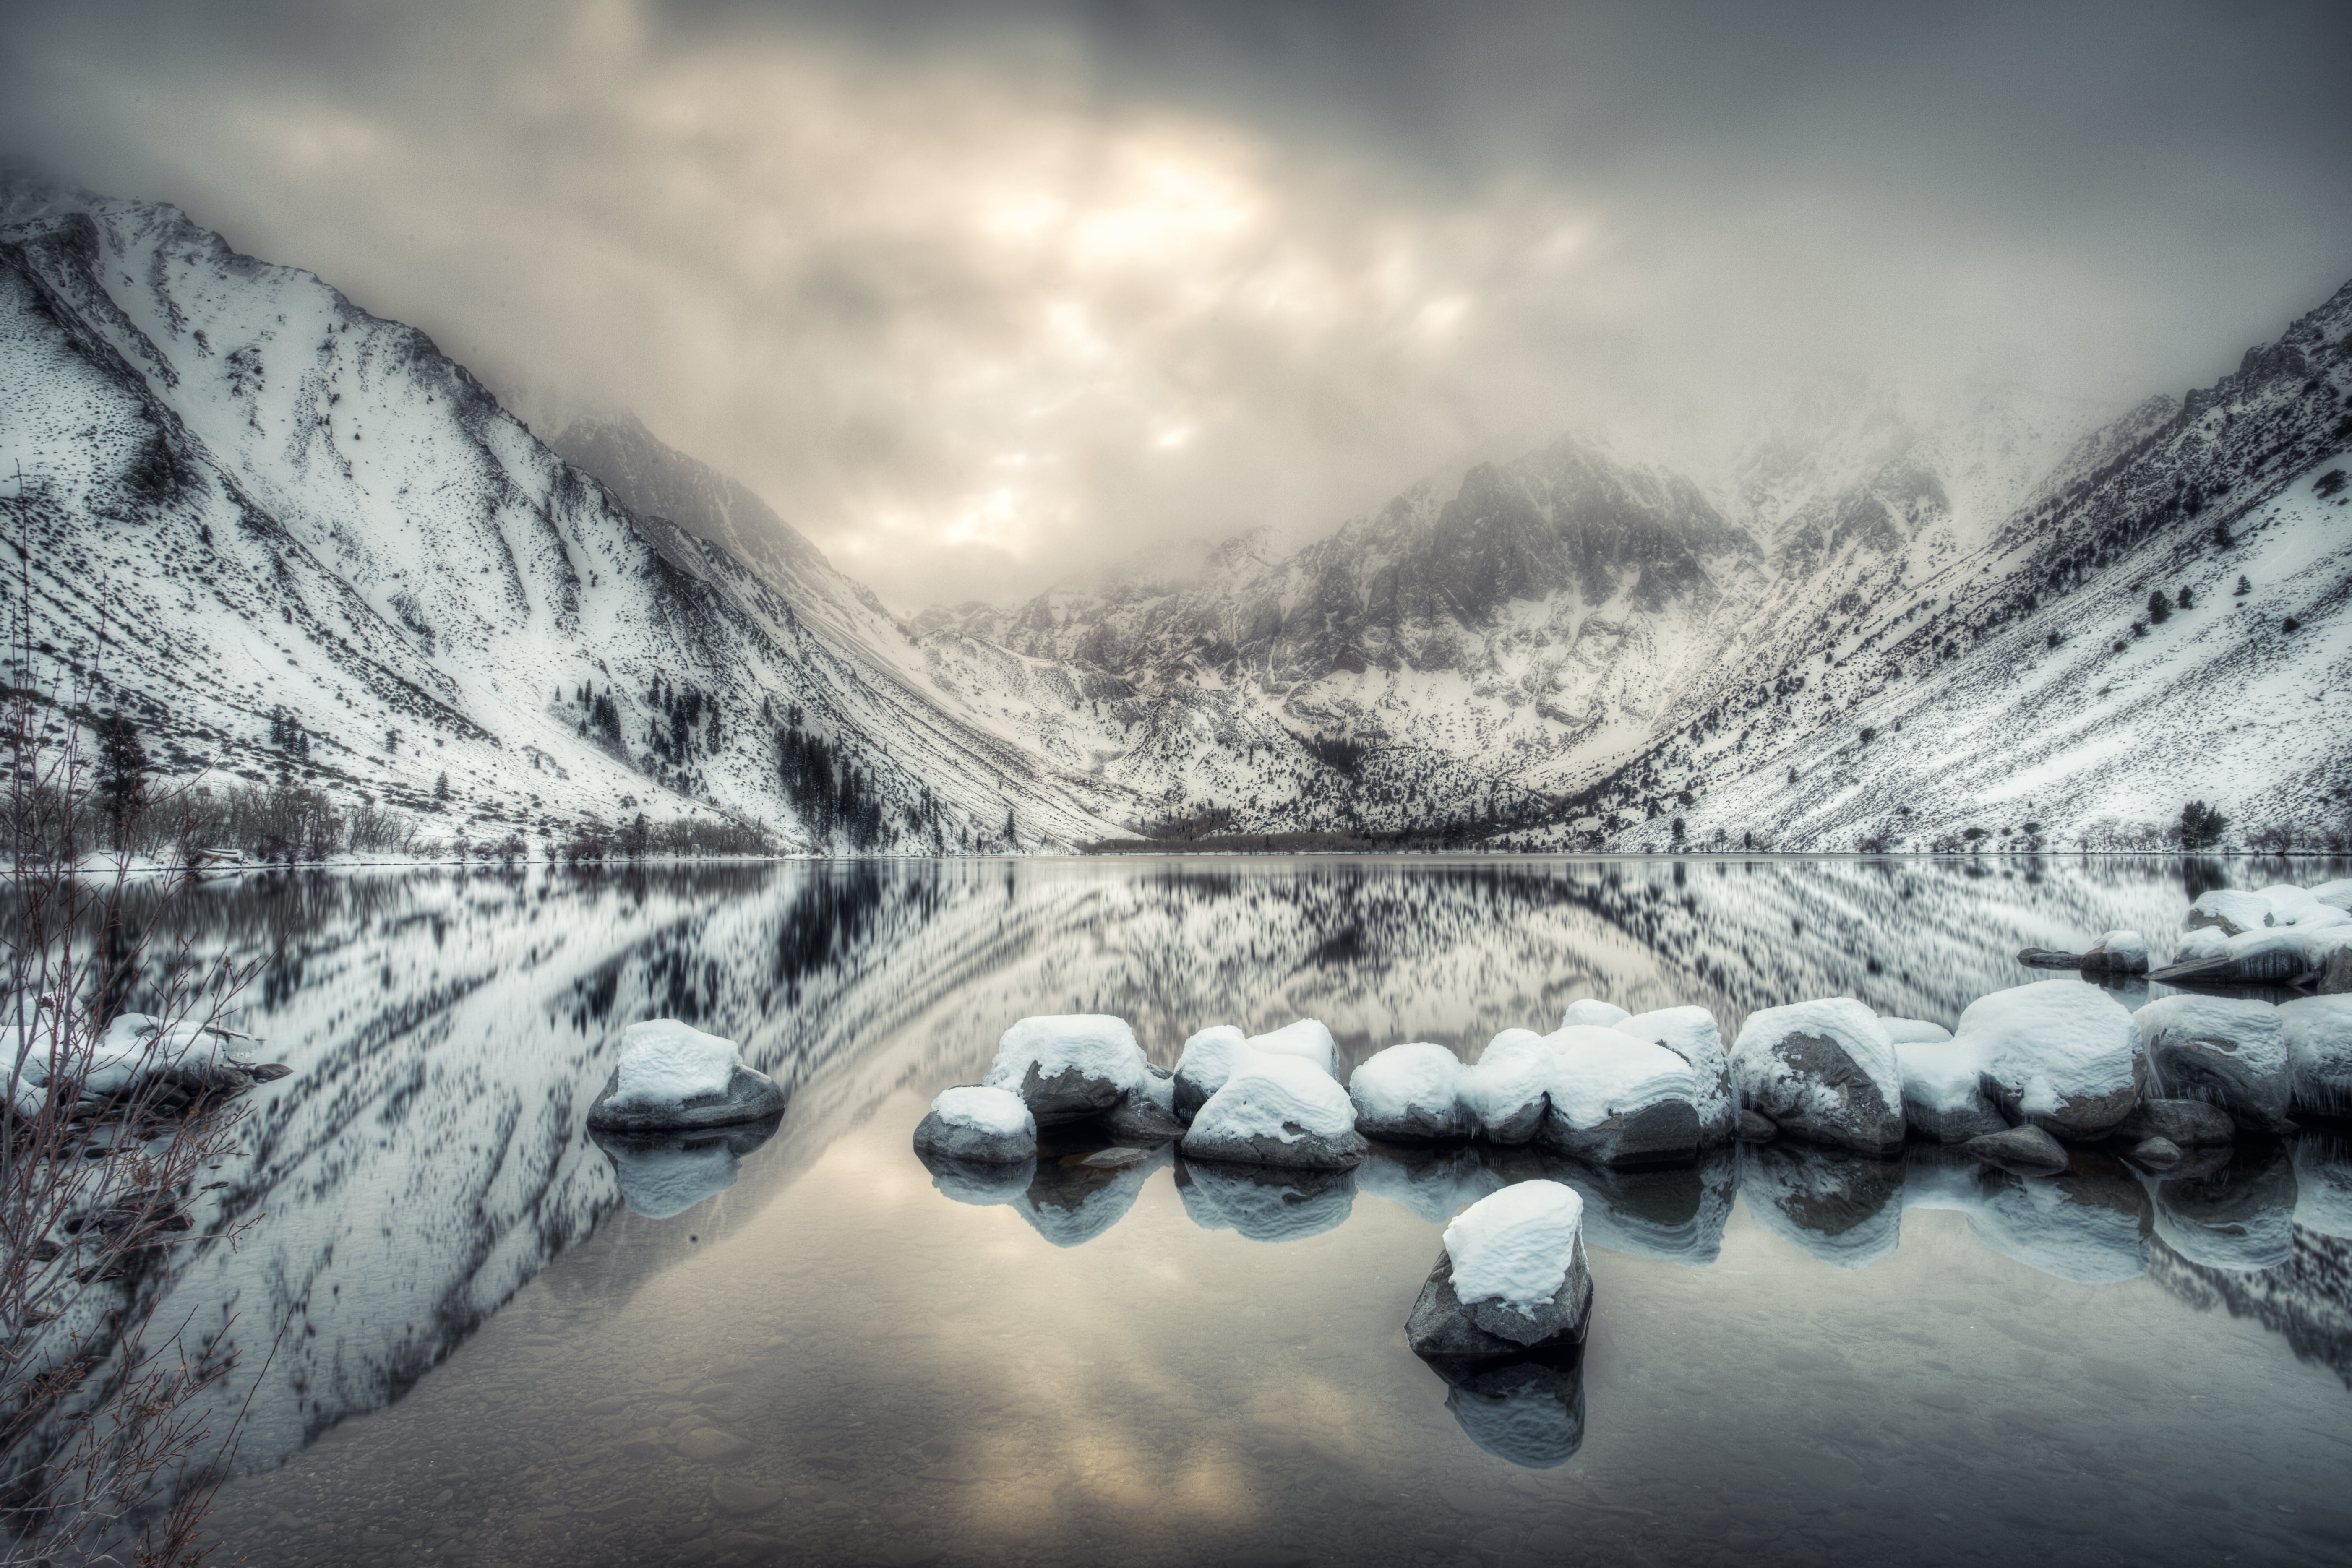 reflection landscape photography of mountain with snow, convict lake